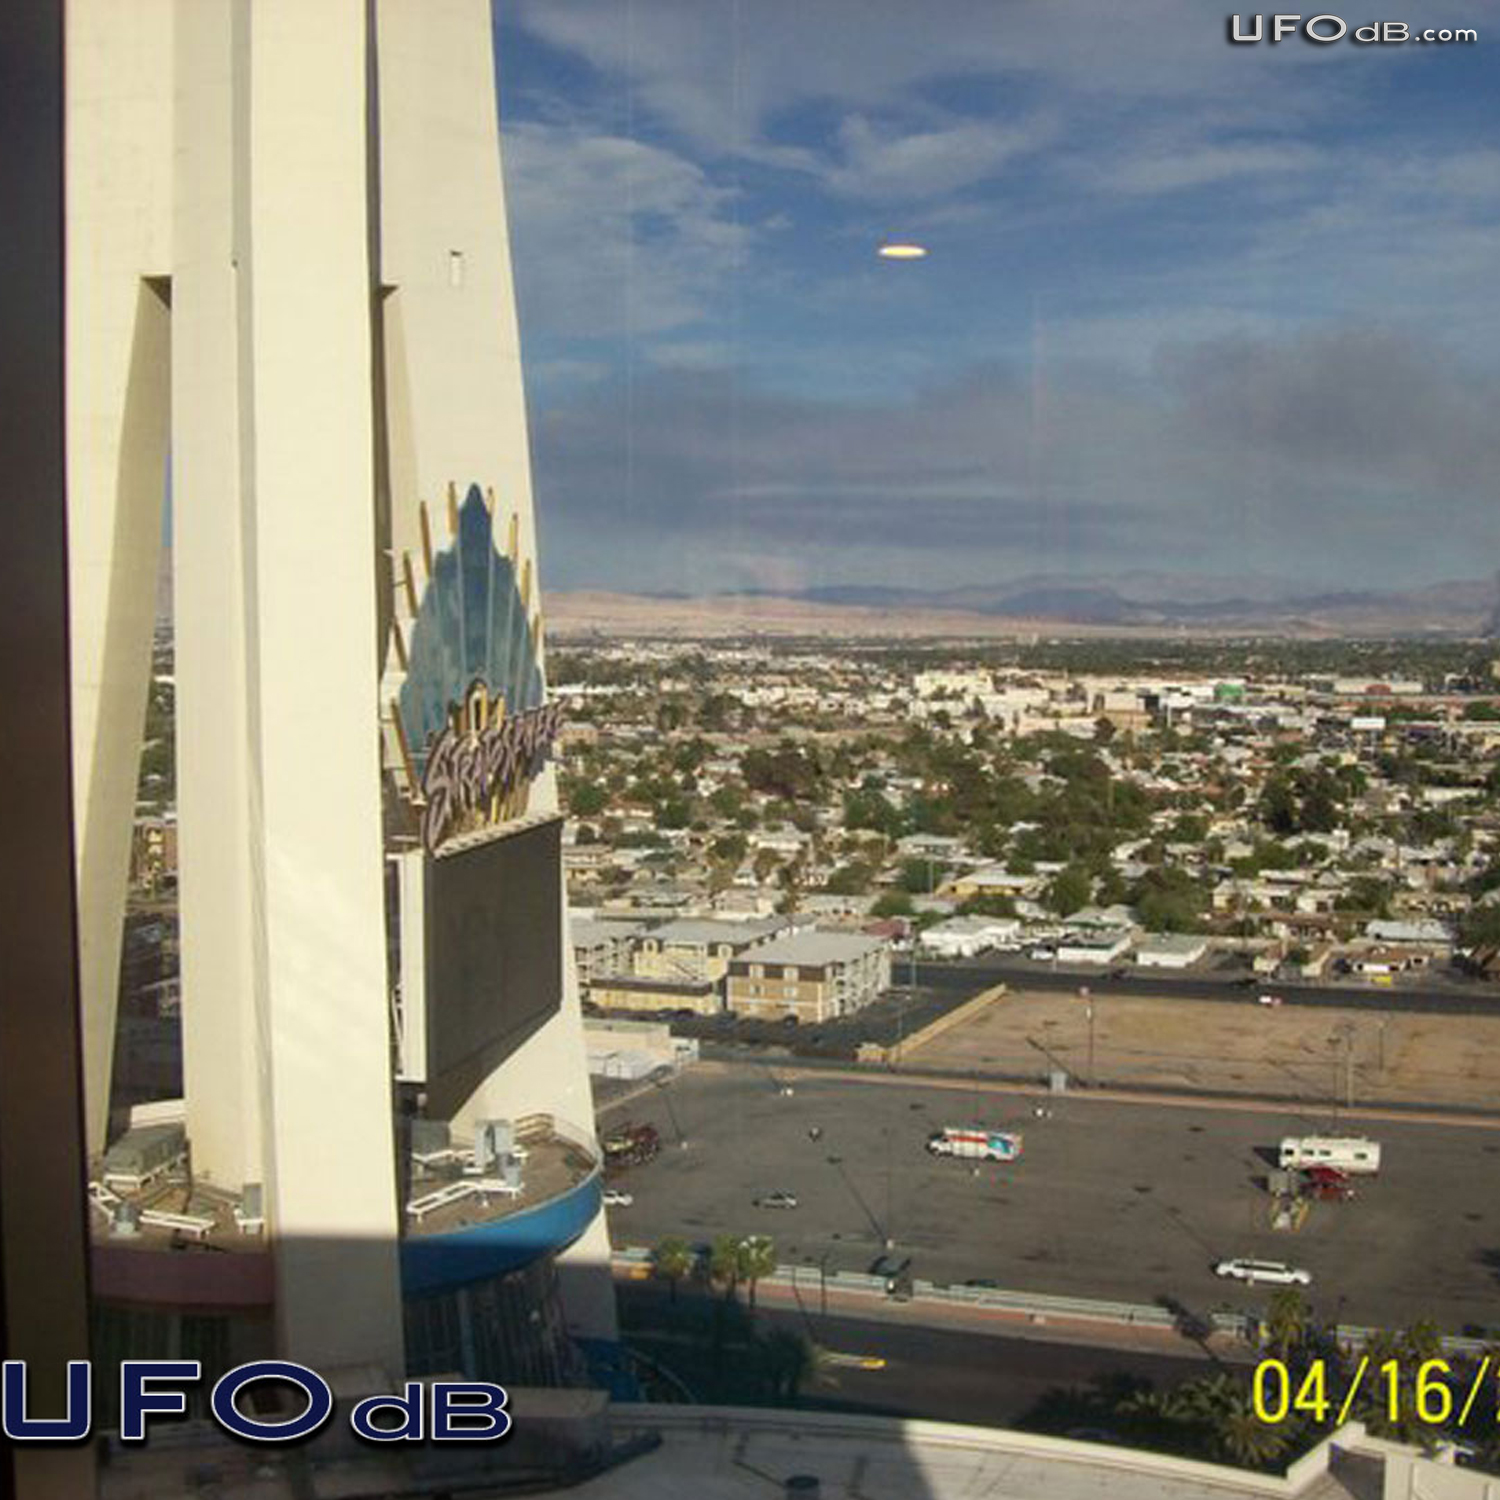 Tourist see UFO from The Stratosphere Hotel, Las Vegas | April 16 2011 UFO Picture #266-2